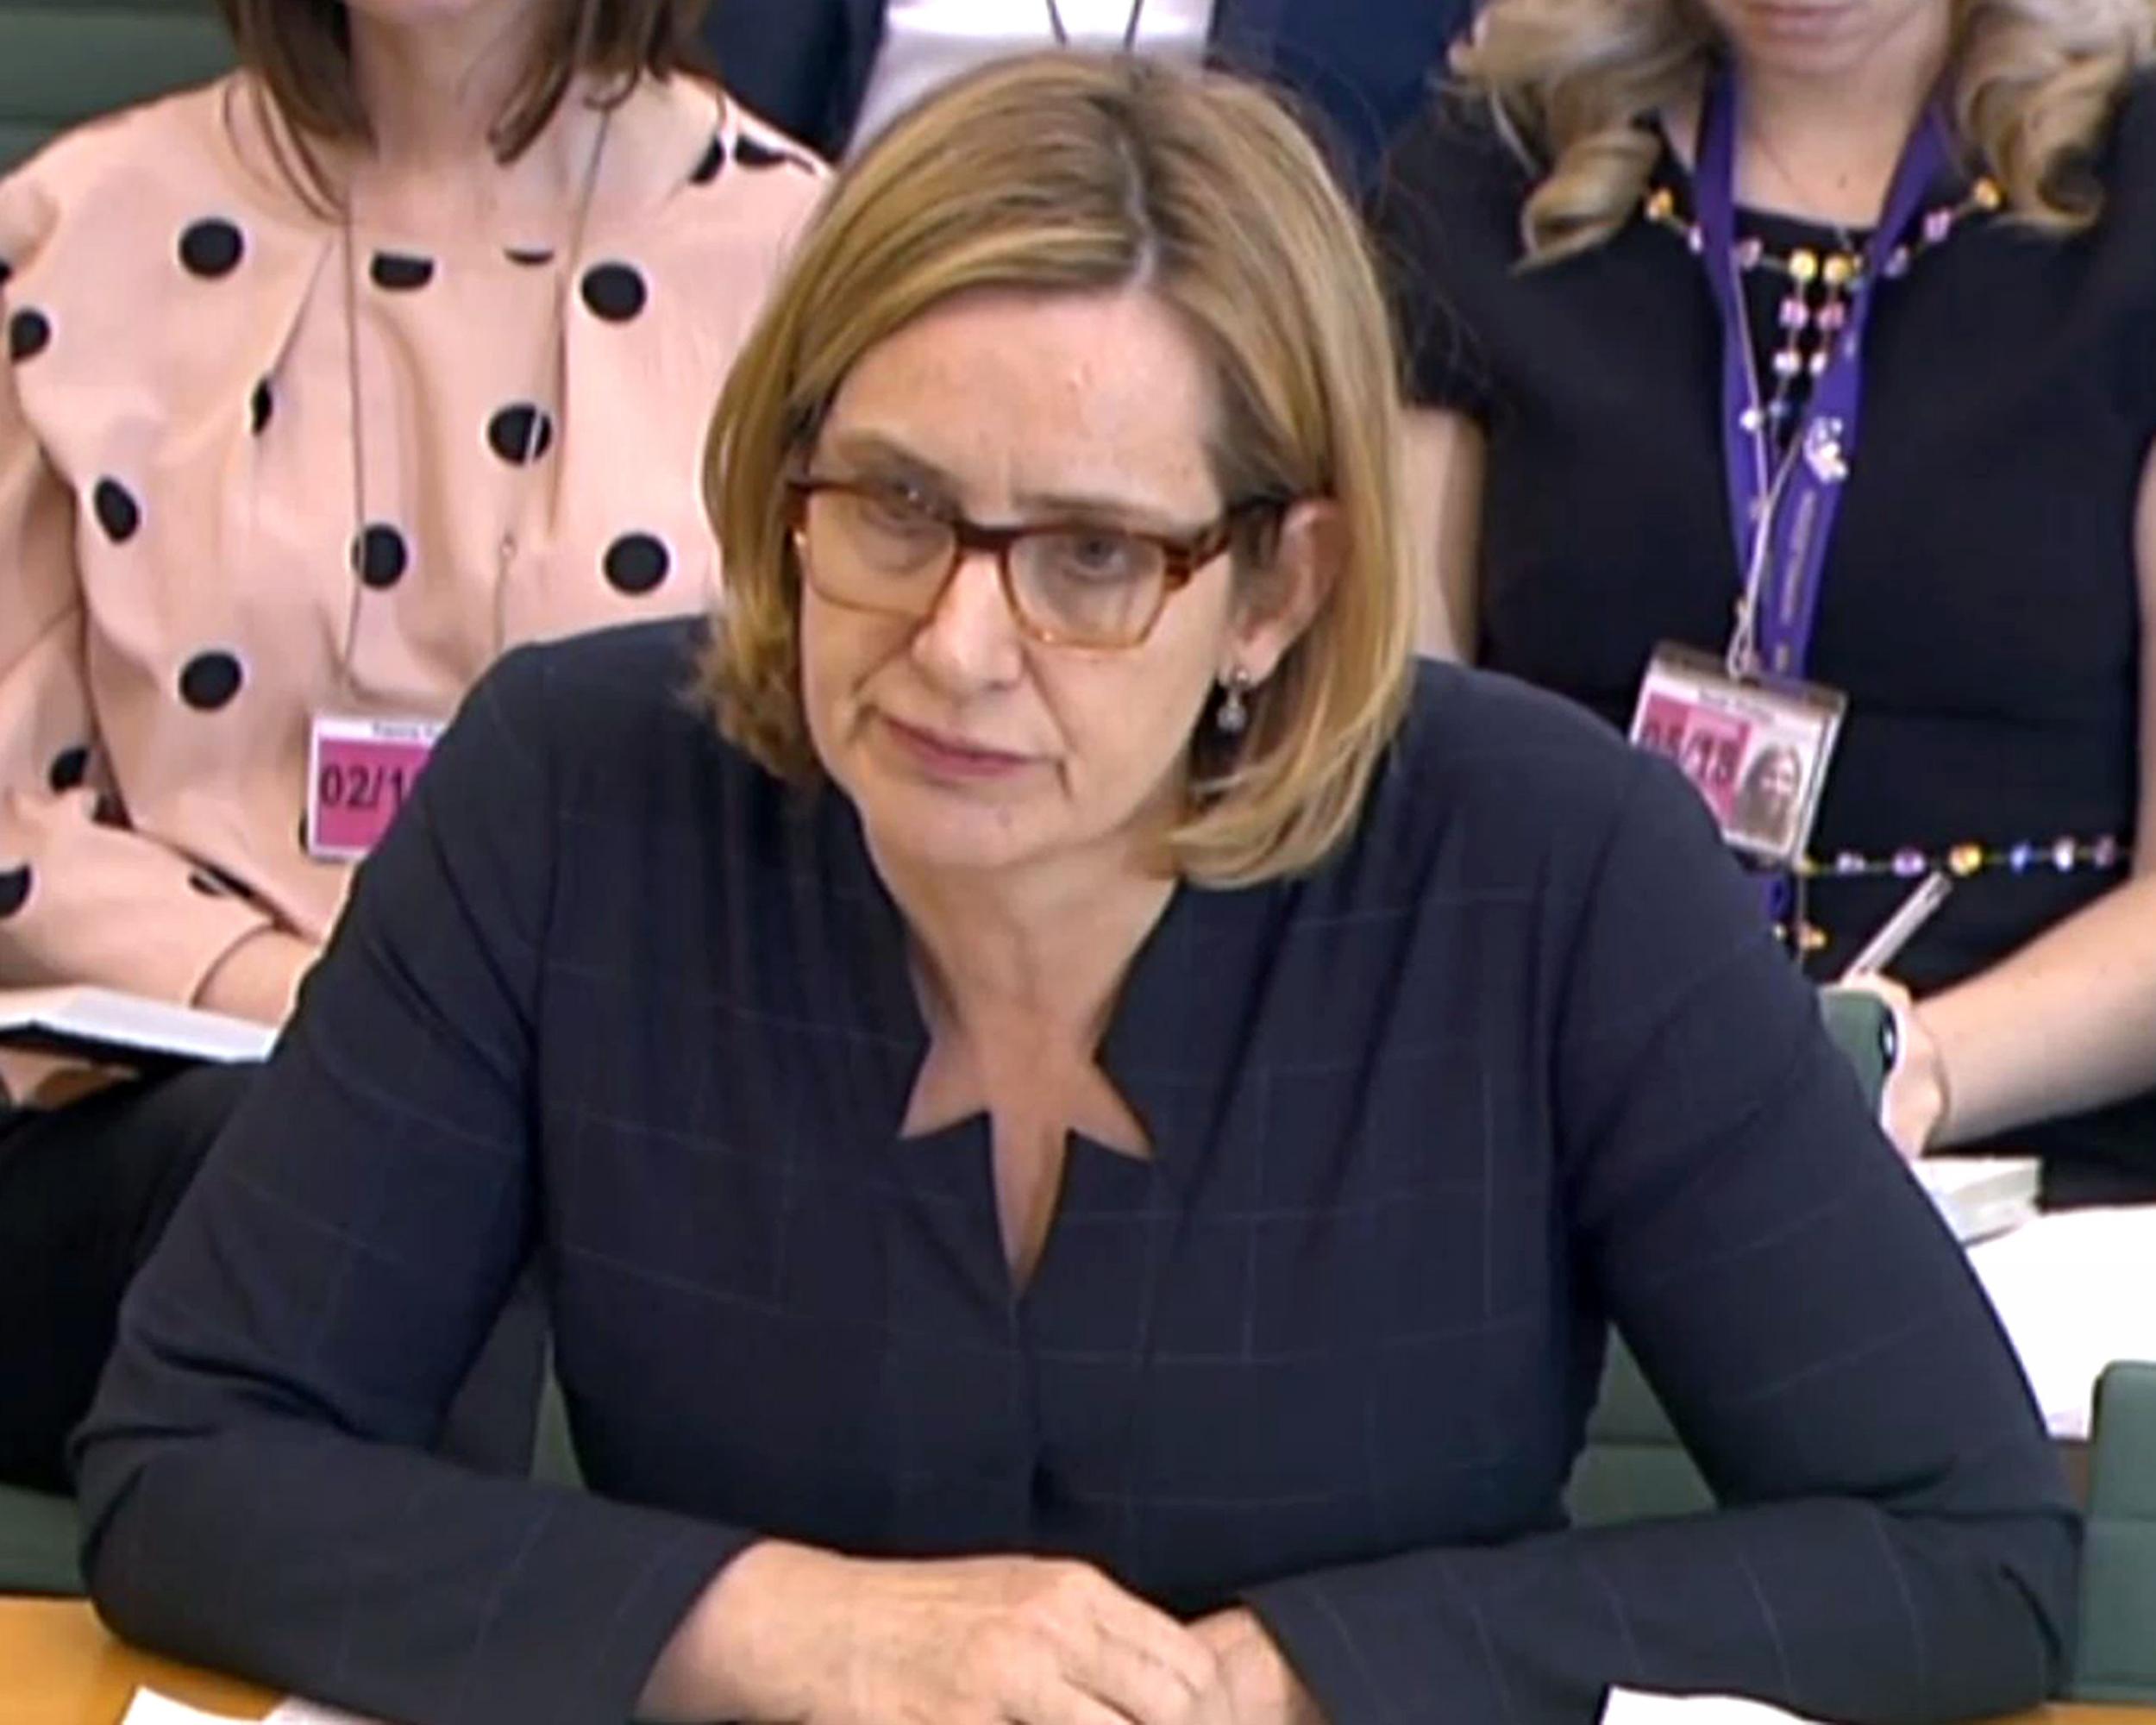 Amber Rudd revealed she did not even know about 'net removal targets' in her own department